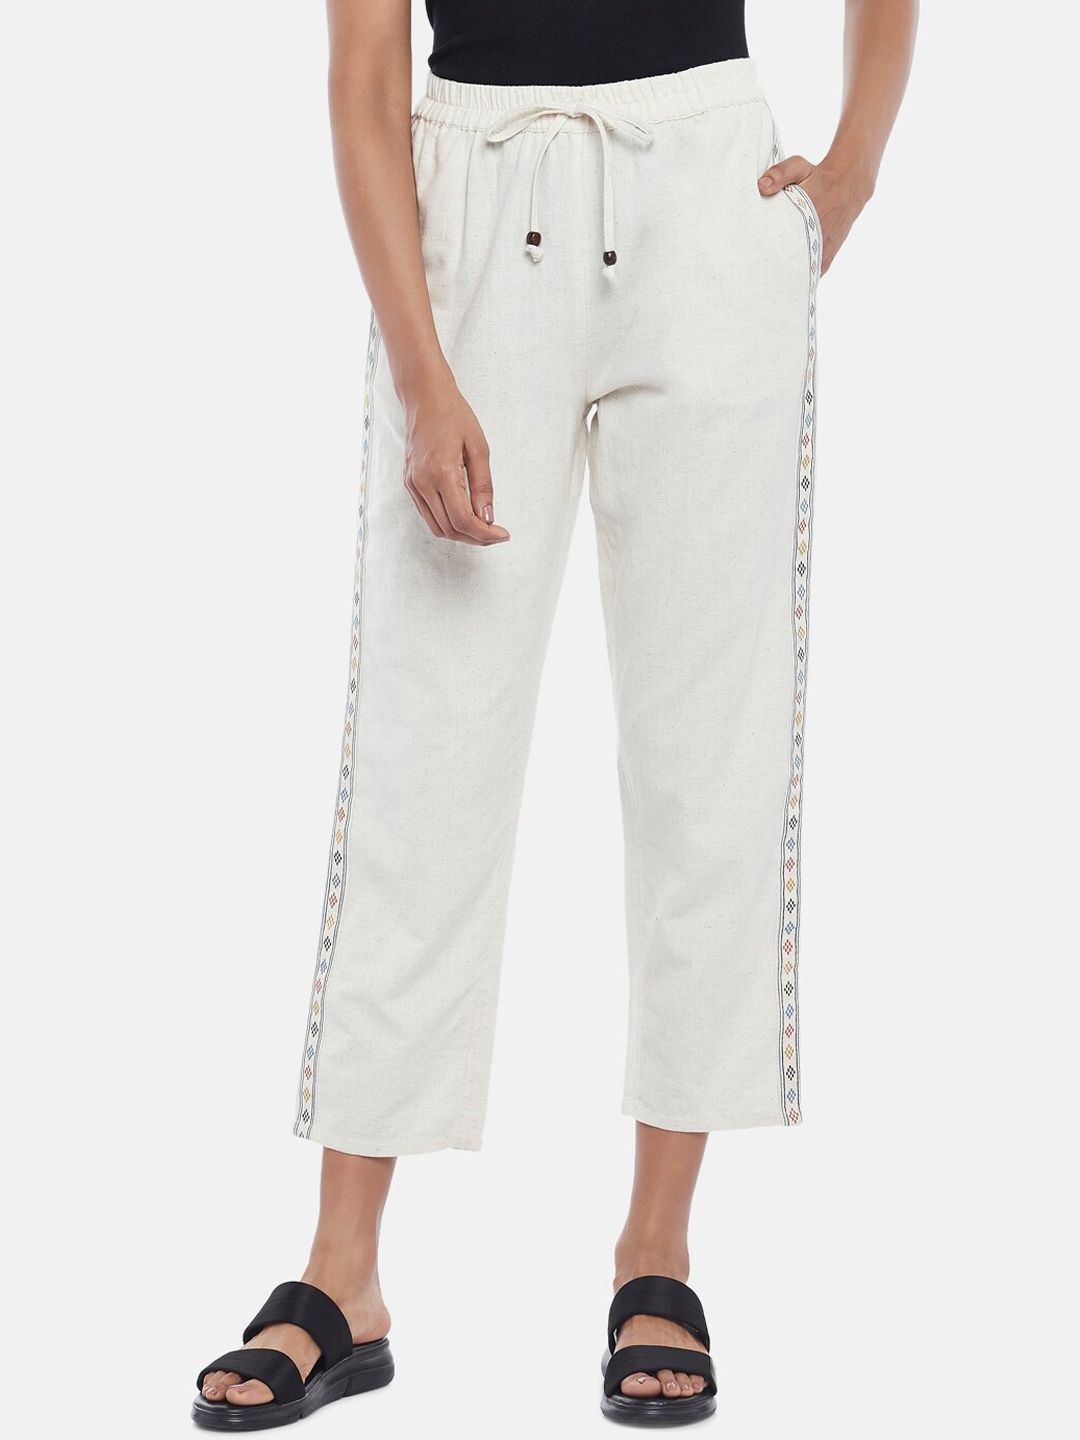 People Women Off White Cotton Culottes Trousers Price in India